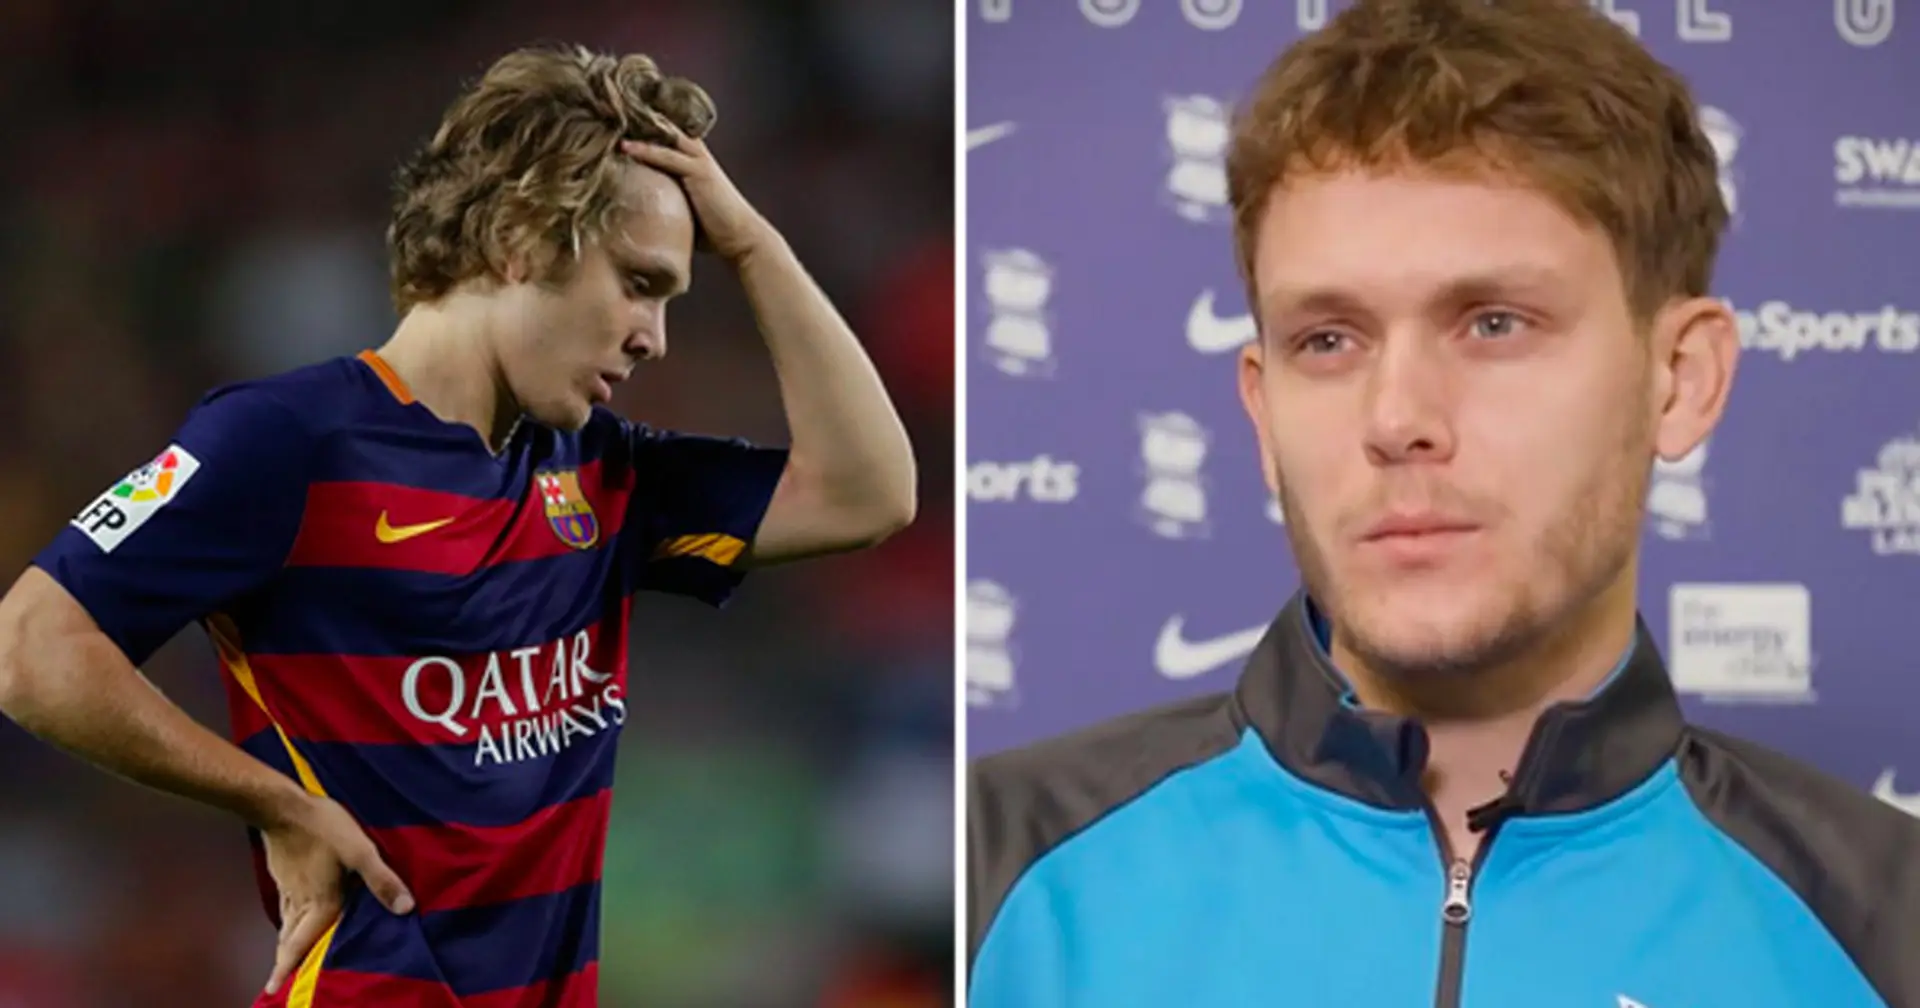 'That was my mistake': Alen Halilovic finally reveals why he failed to succeed at Barca